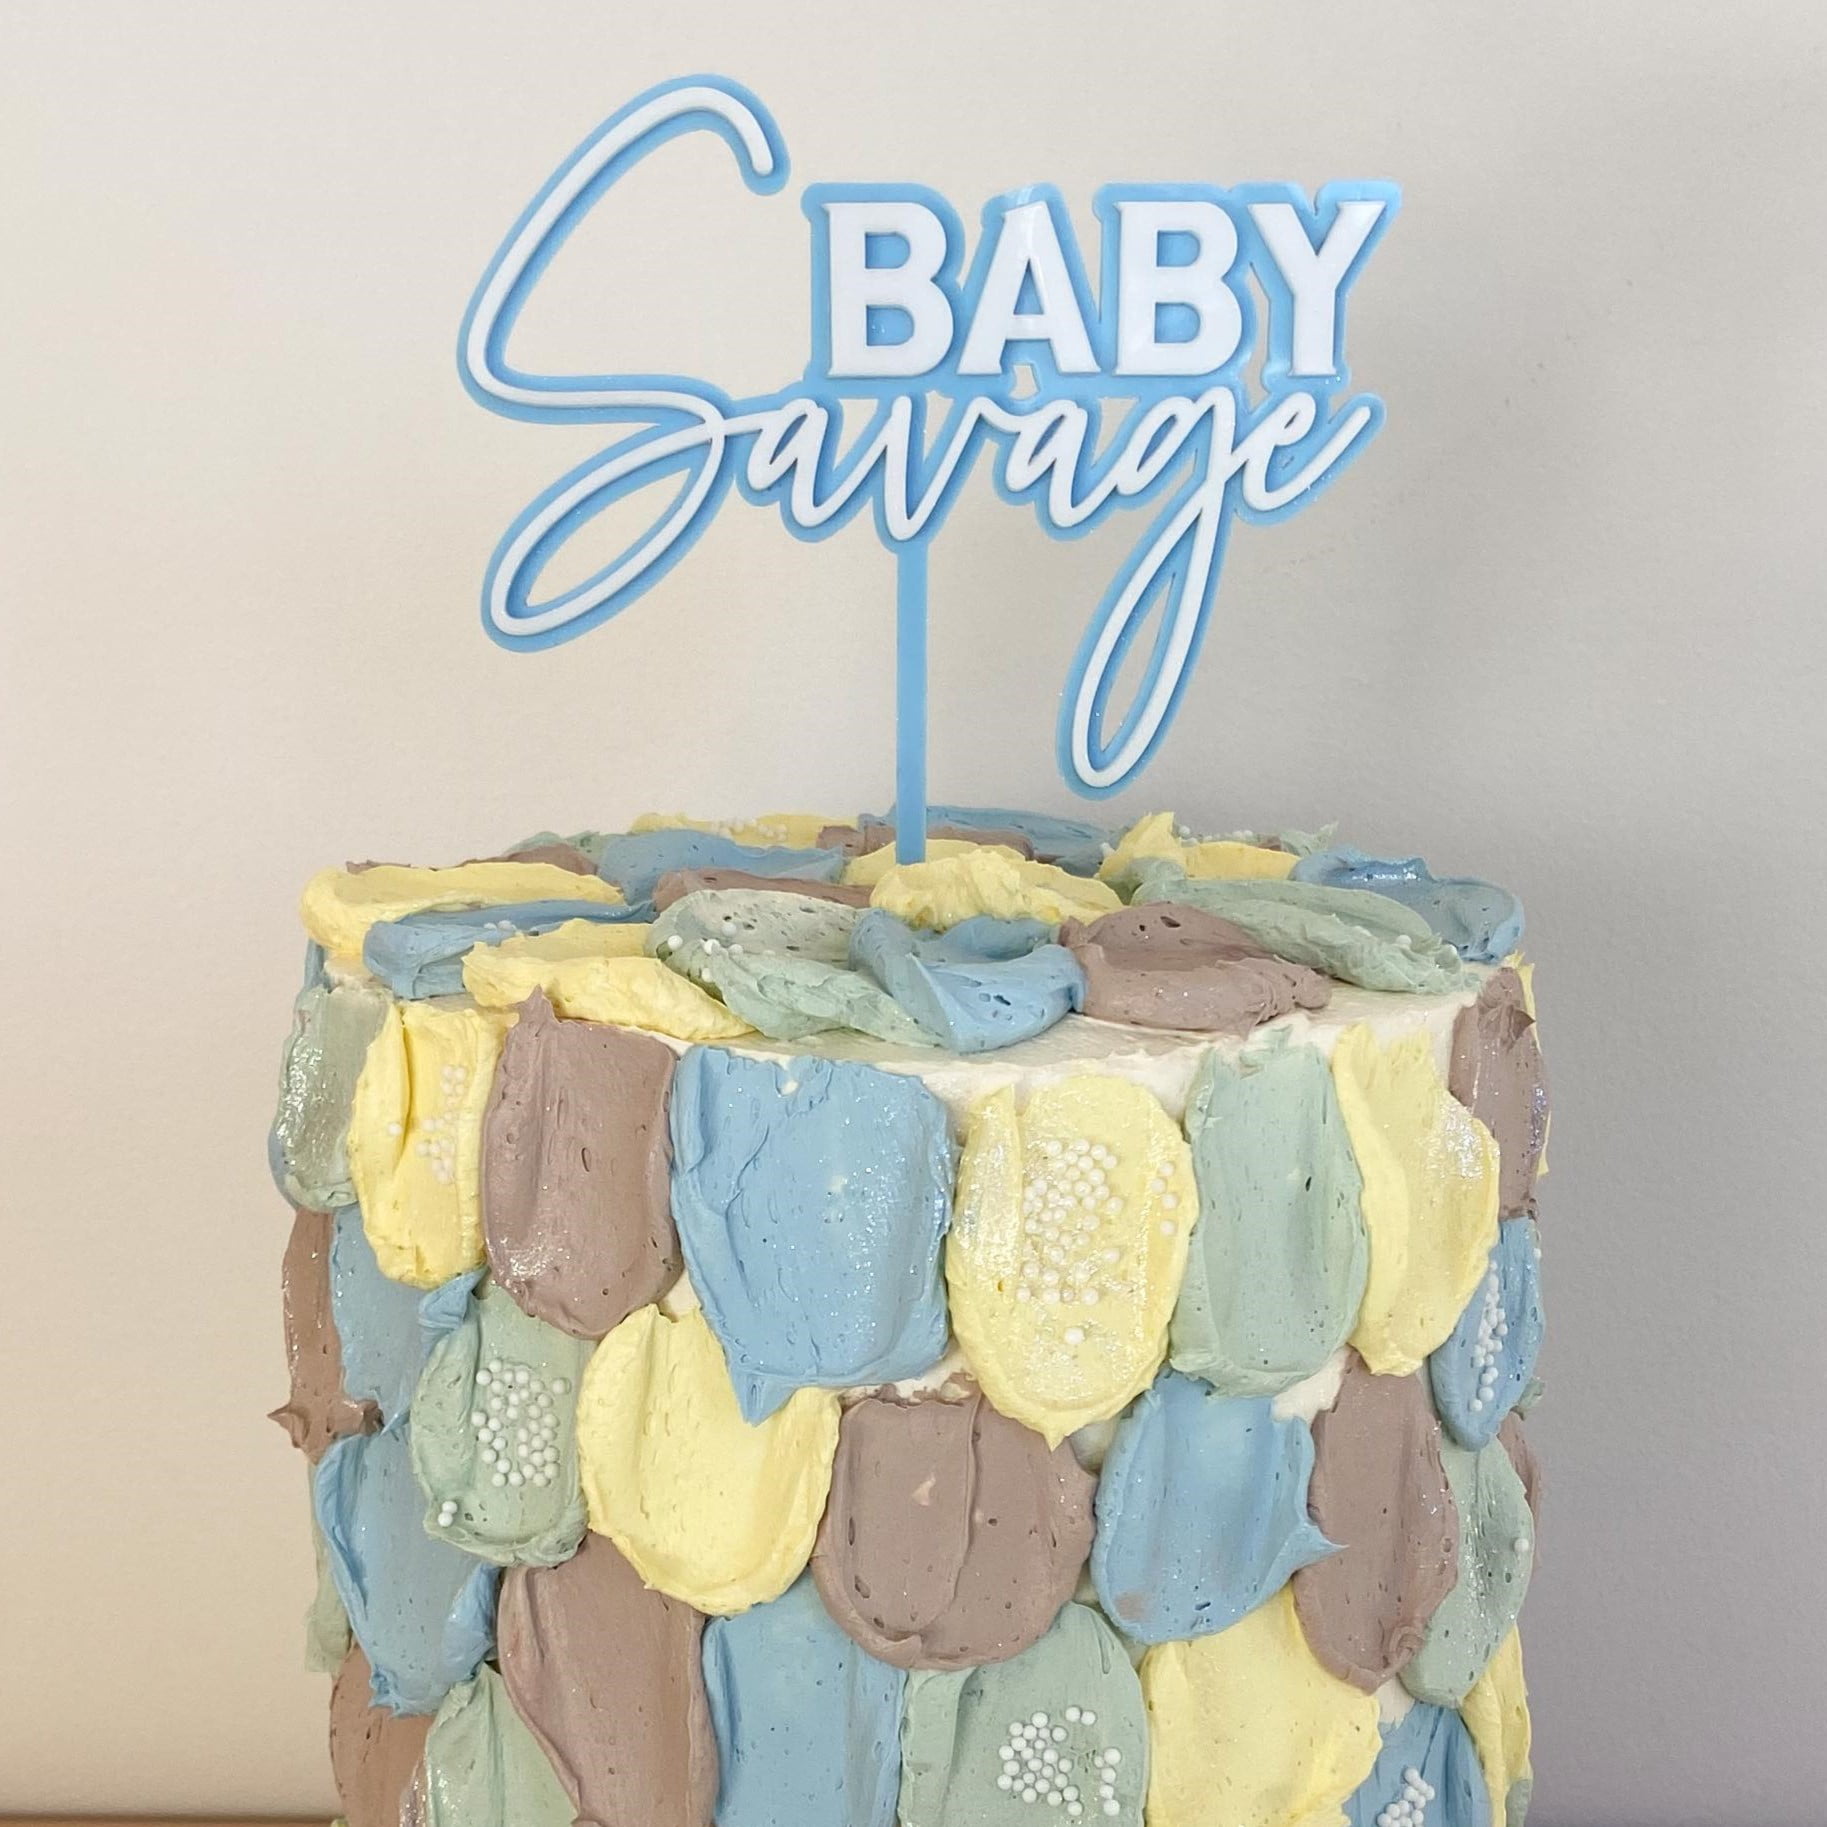 Baby Themed Cakes